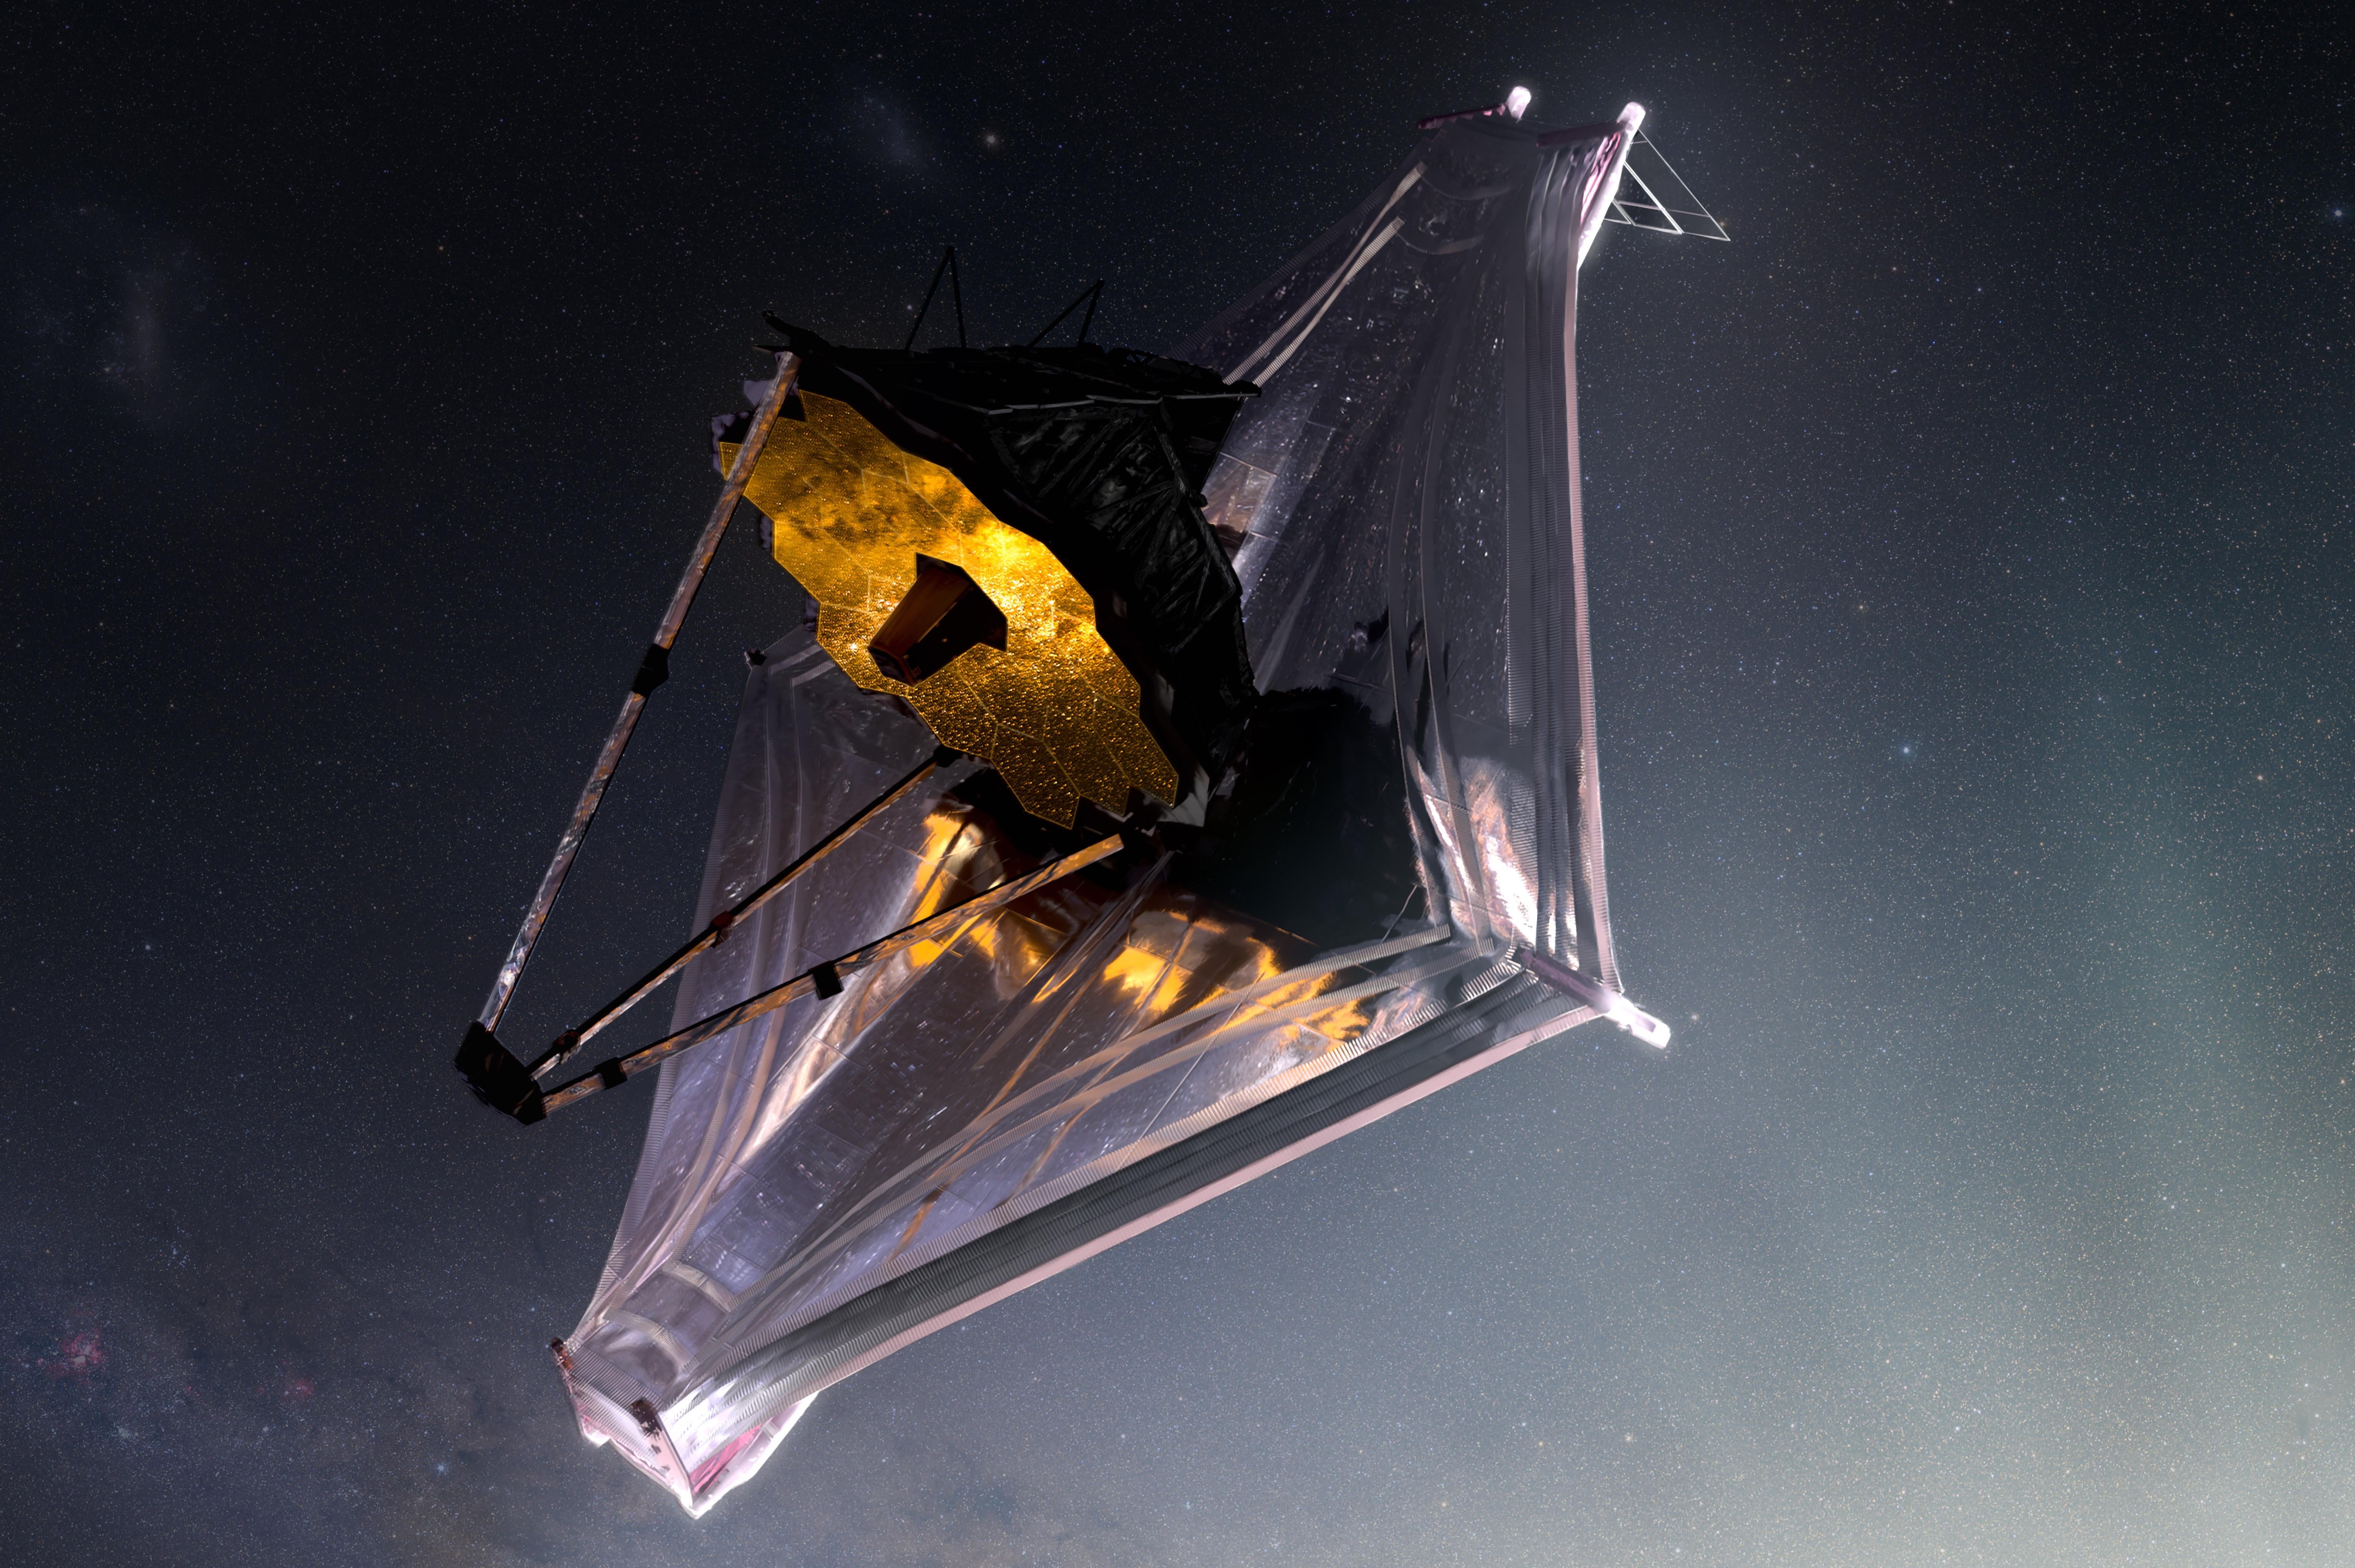 Webb Telescope Brings a Star Into Focus as It Completes ‘Image Stacking’ Alignment Phase